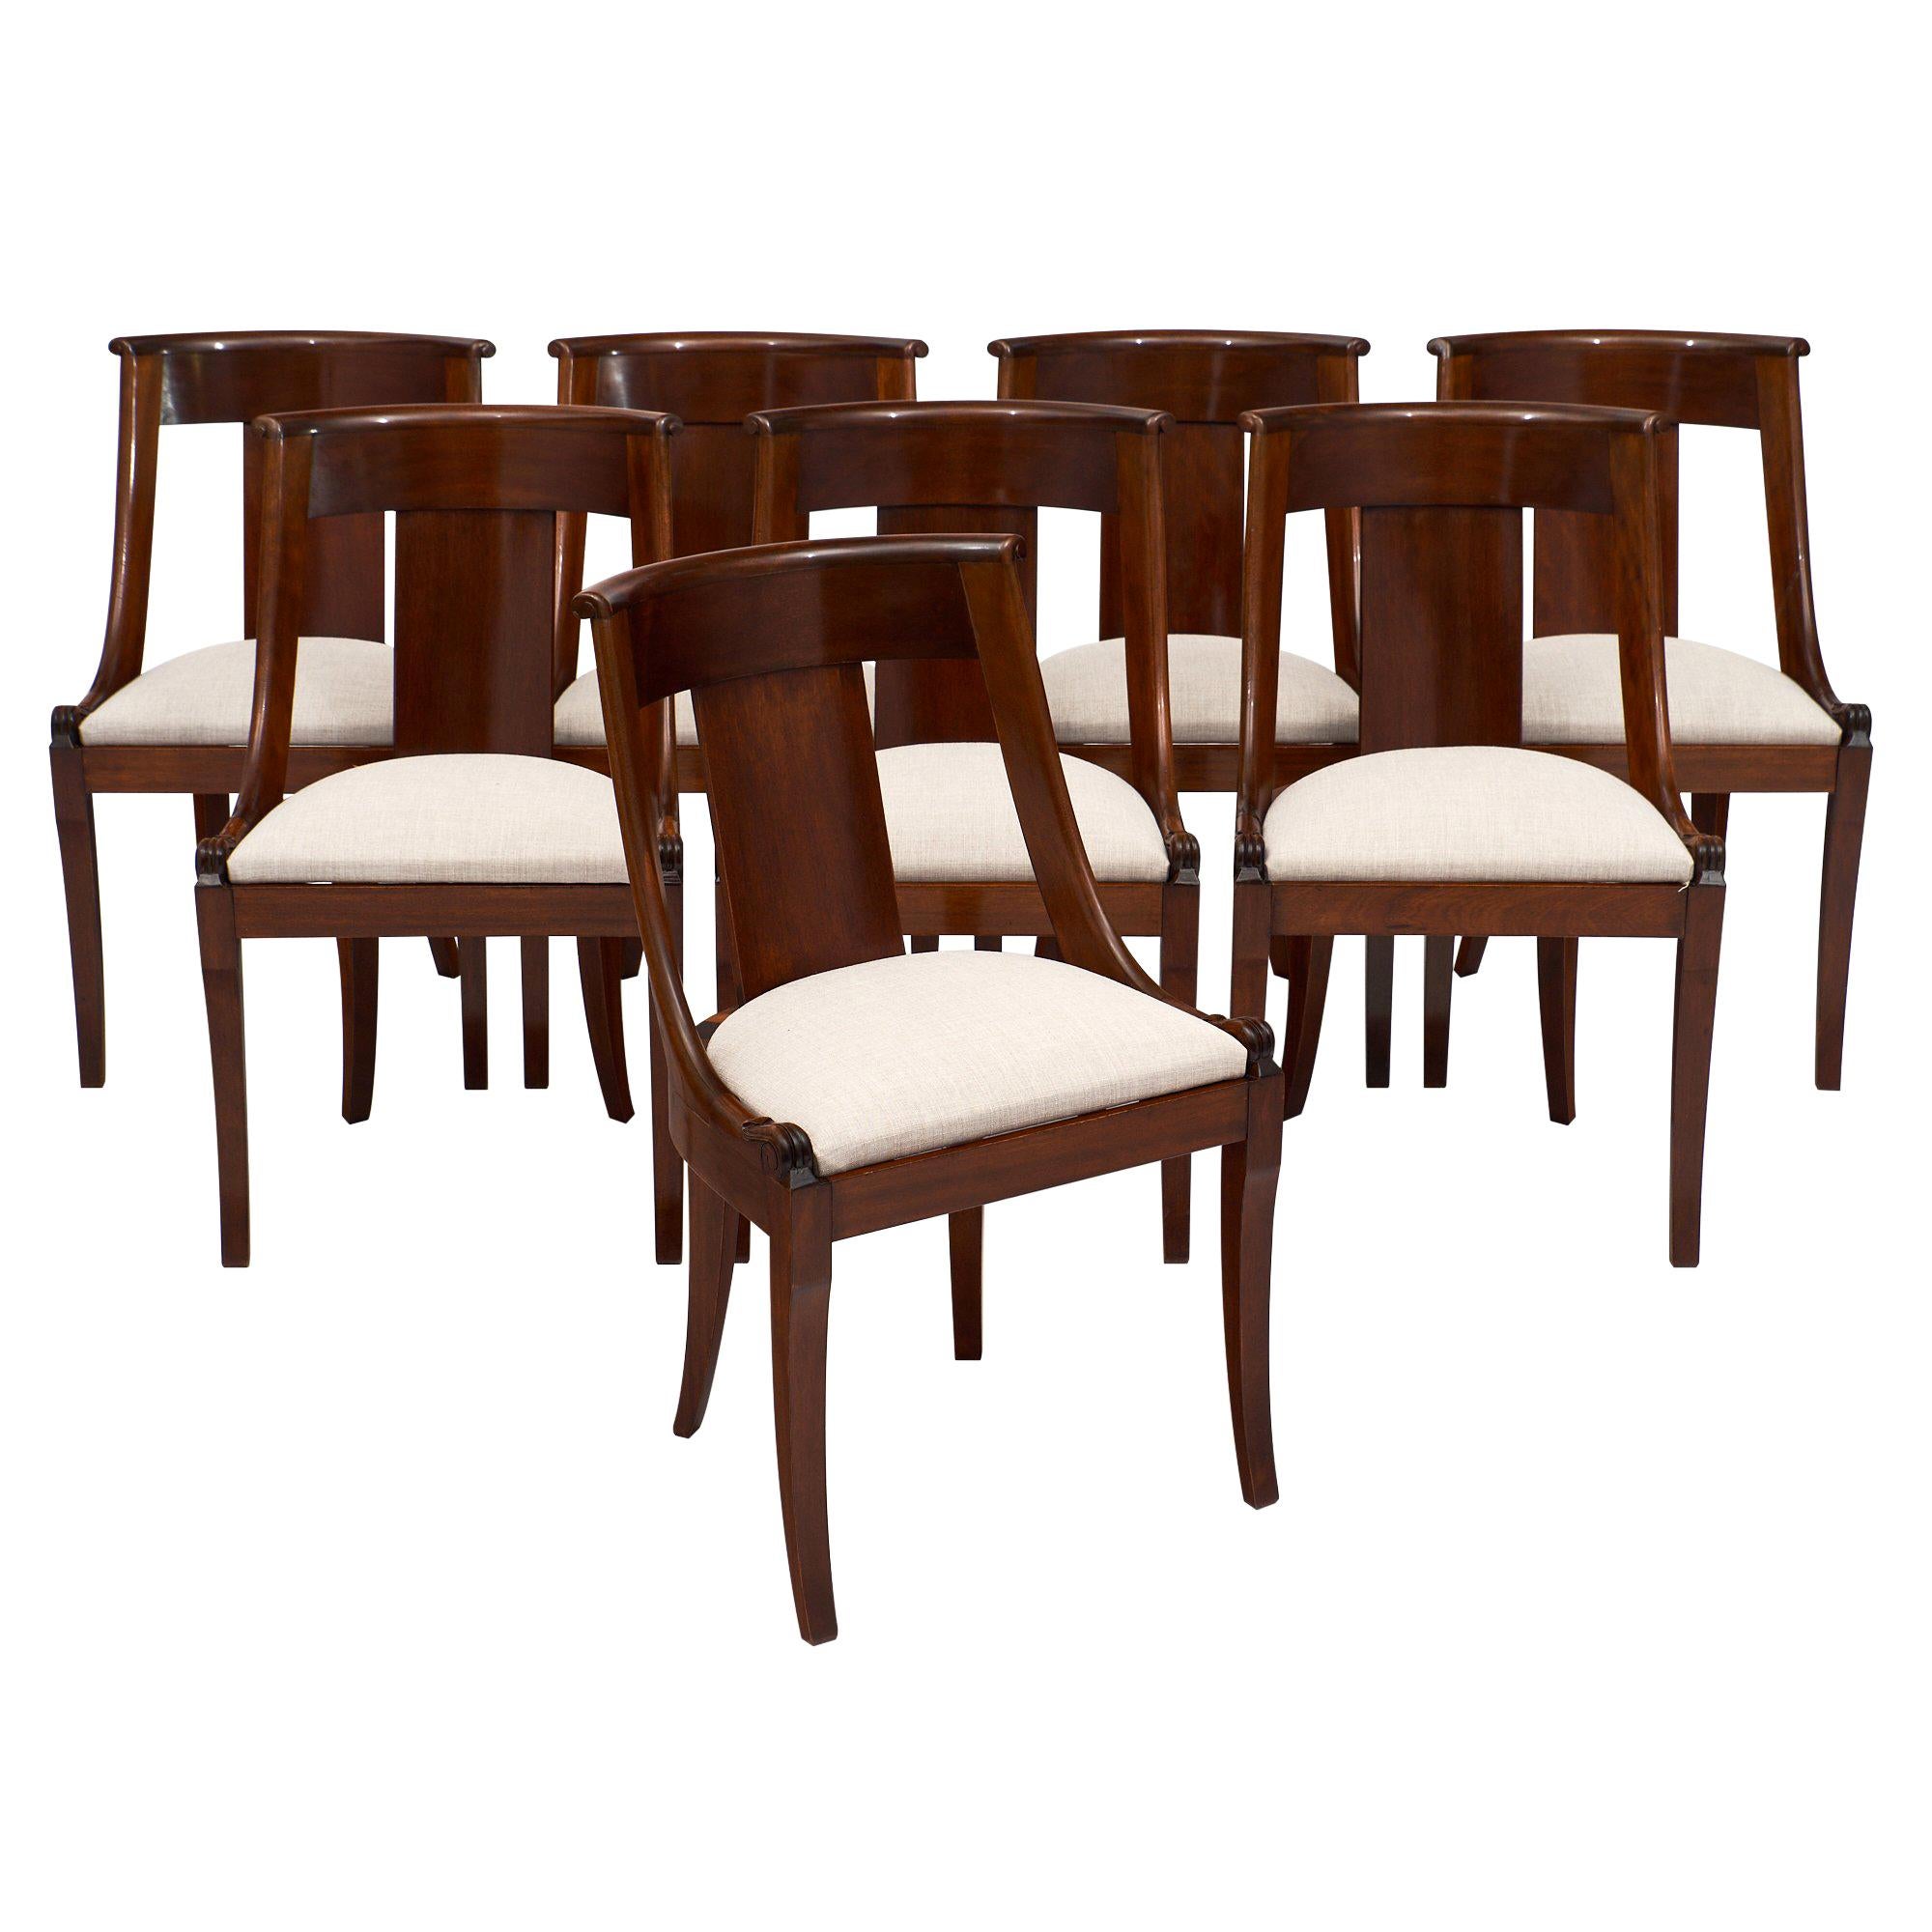 Gondola Empire Style Dining Chairs